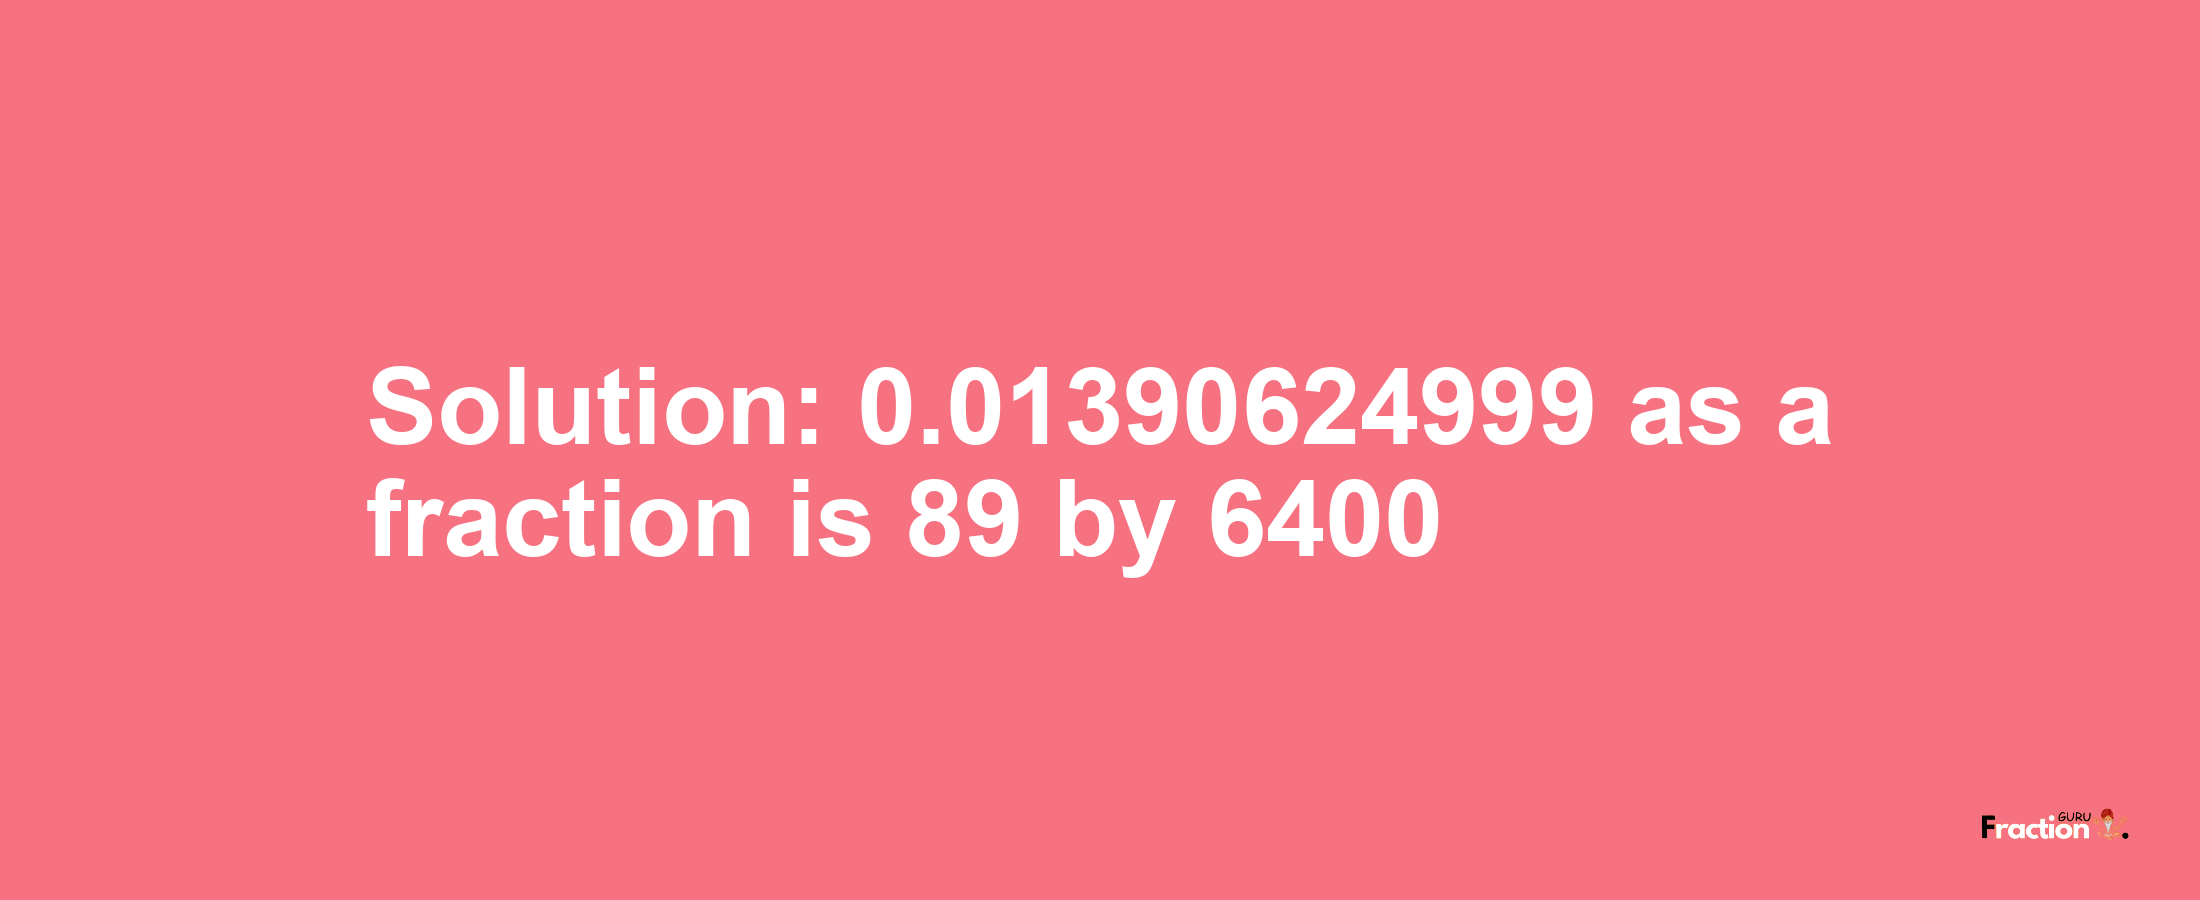 Solution:0.01390624999 as a fraction is 89/6400